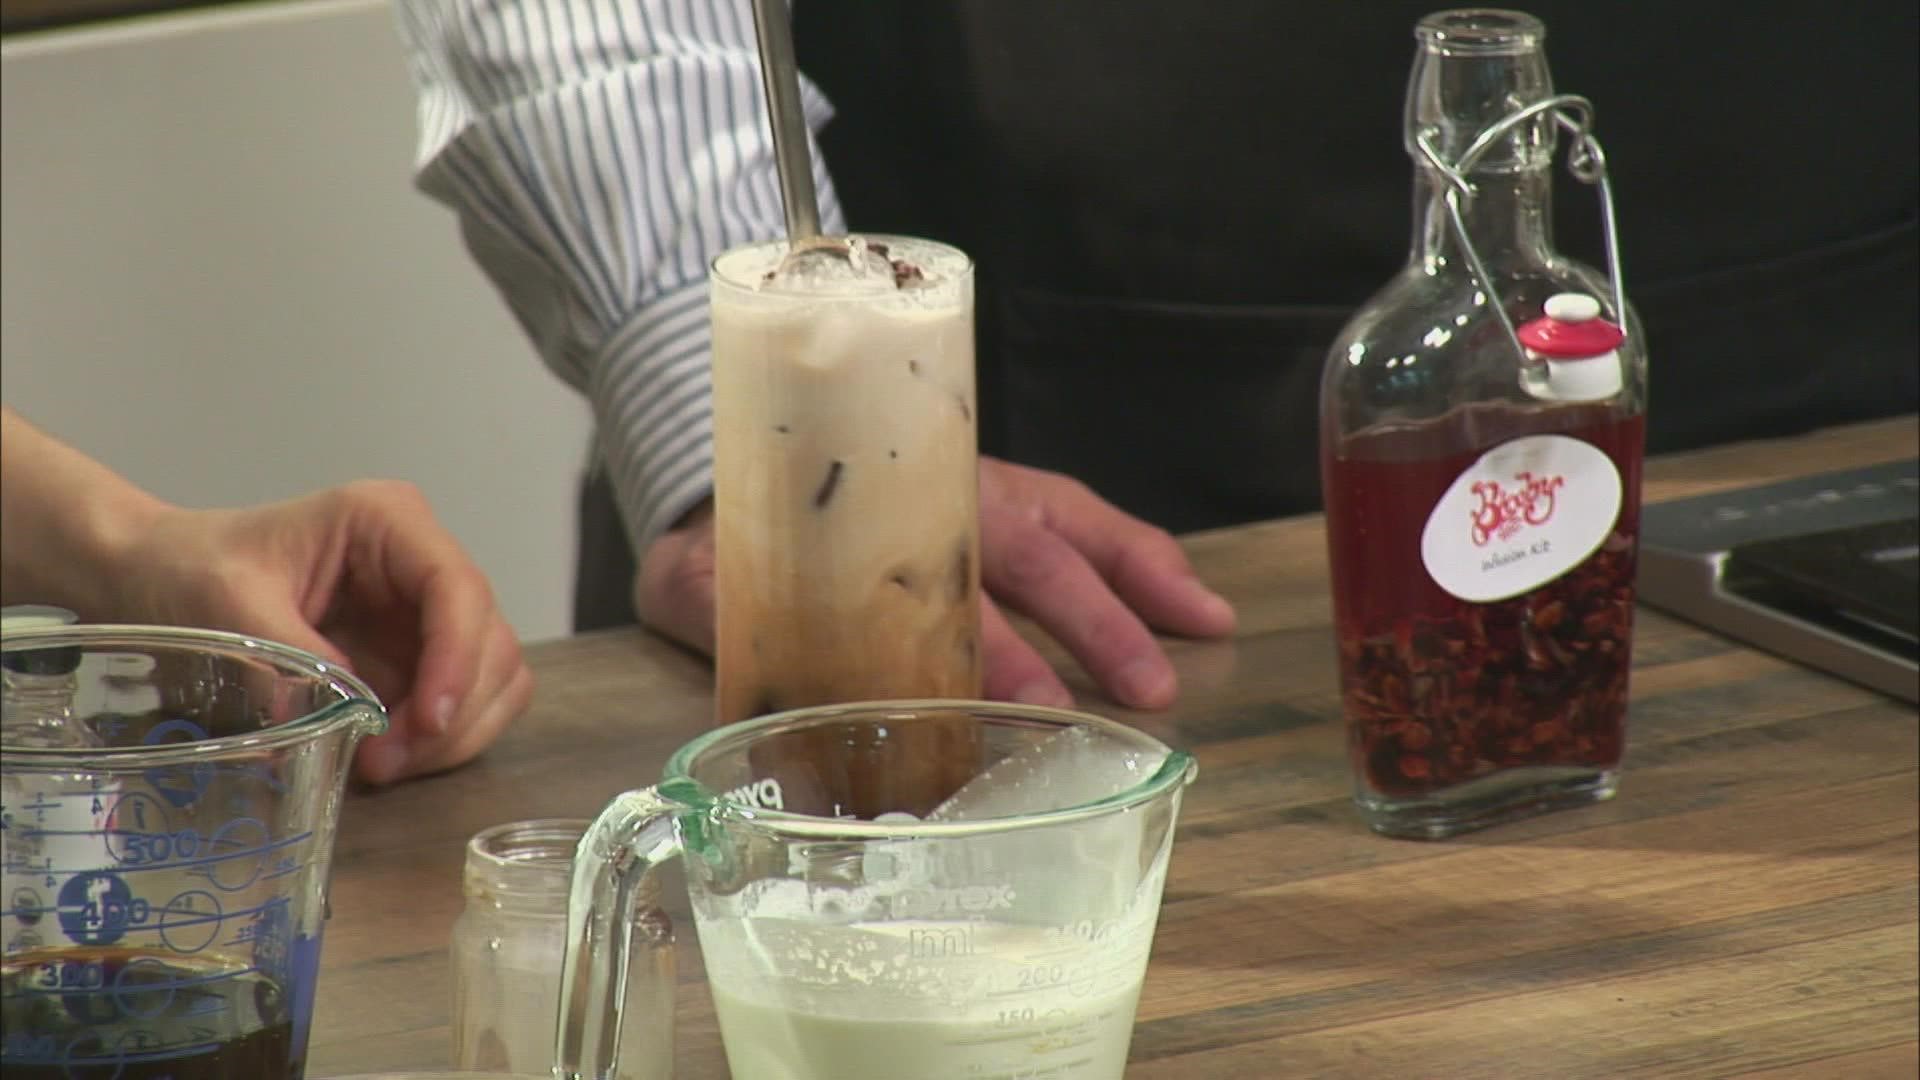 Bonnie Foehr from Bixby Chocolate joins us with a recipe that goes perfect with brunch.